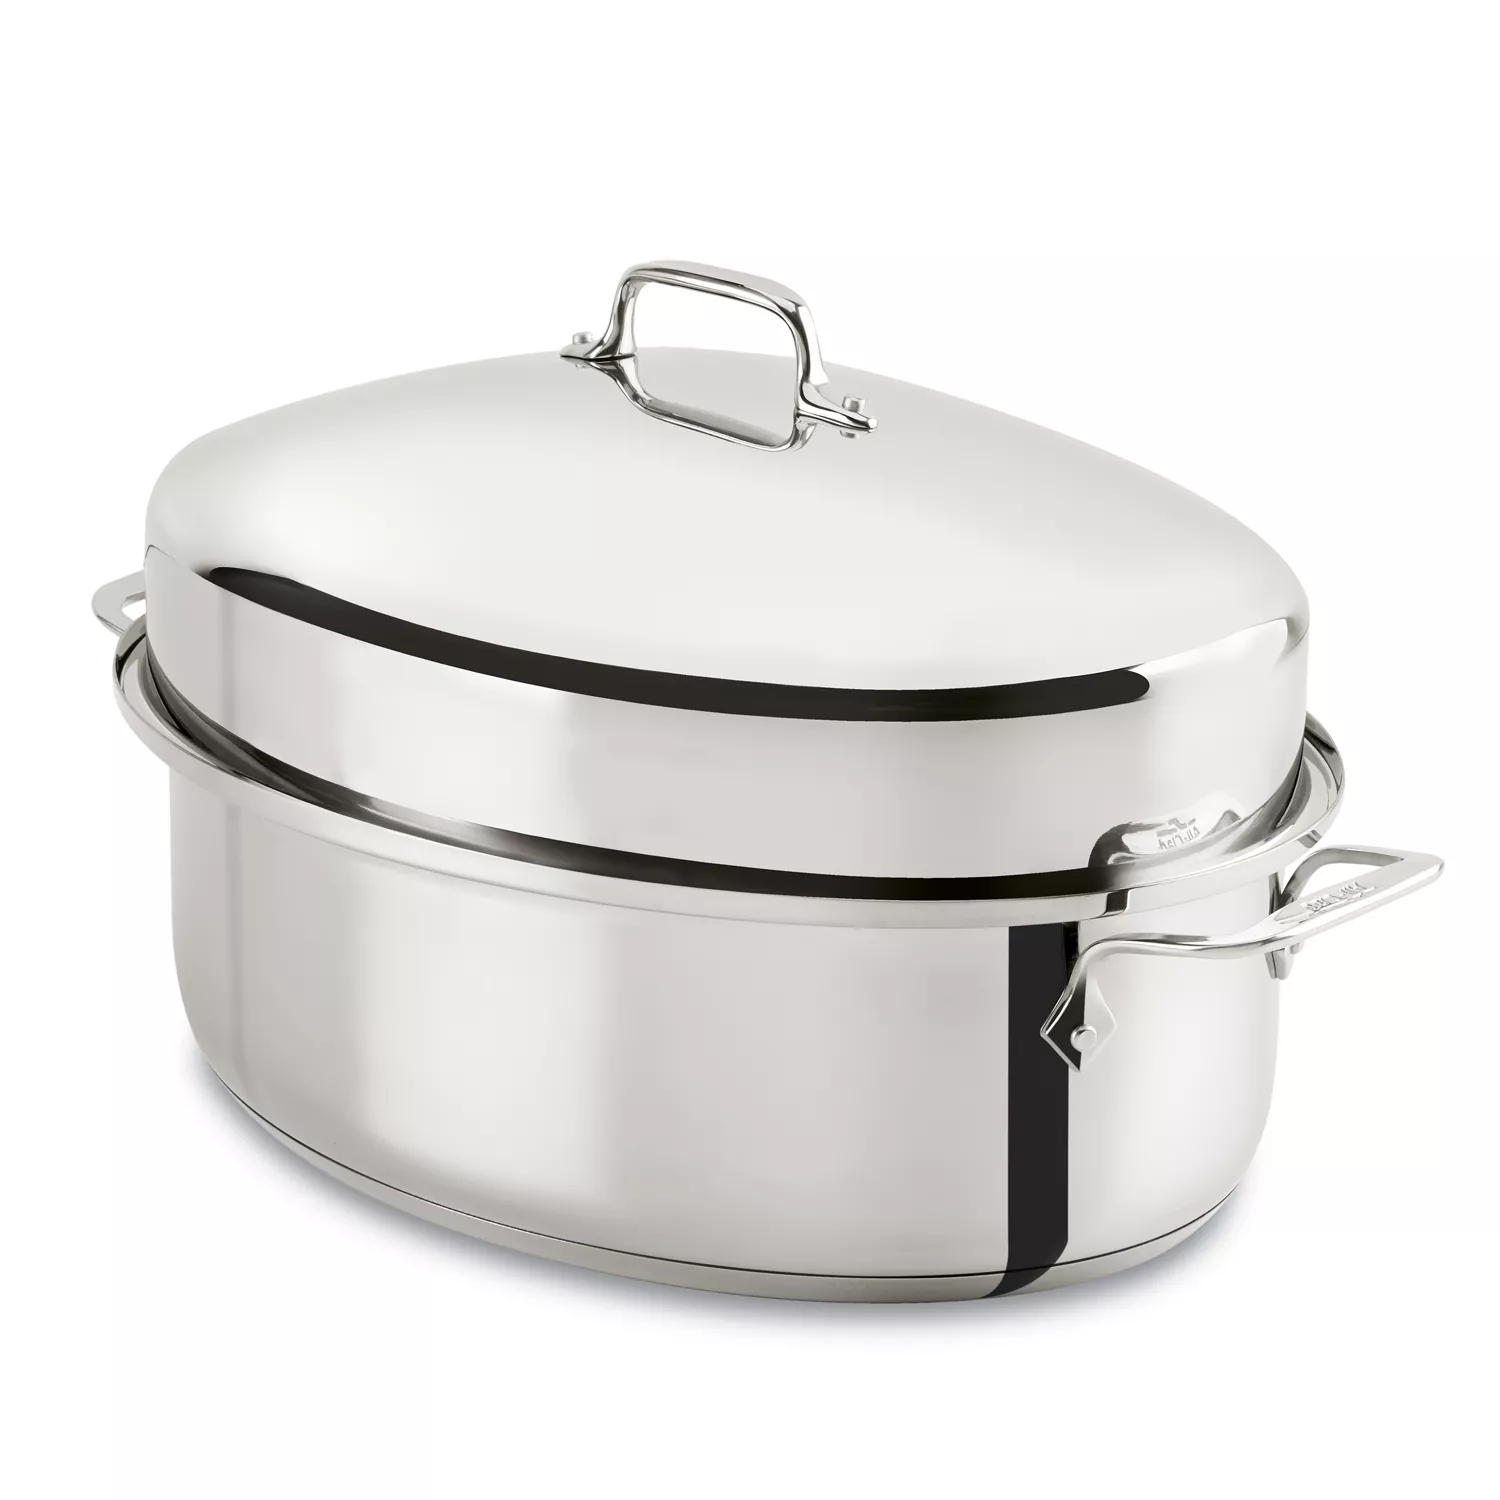 6-Quart Enameled Coated Oval Roaster with Stainless Steel Lid